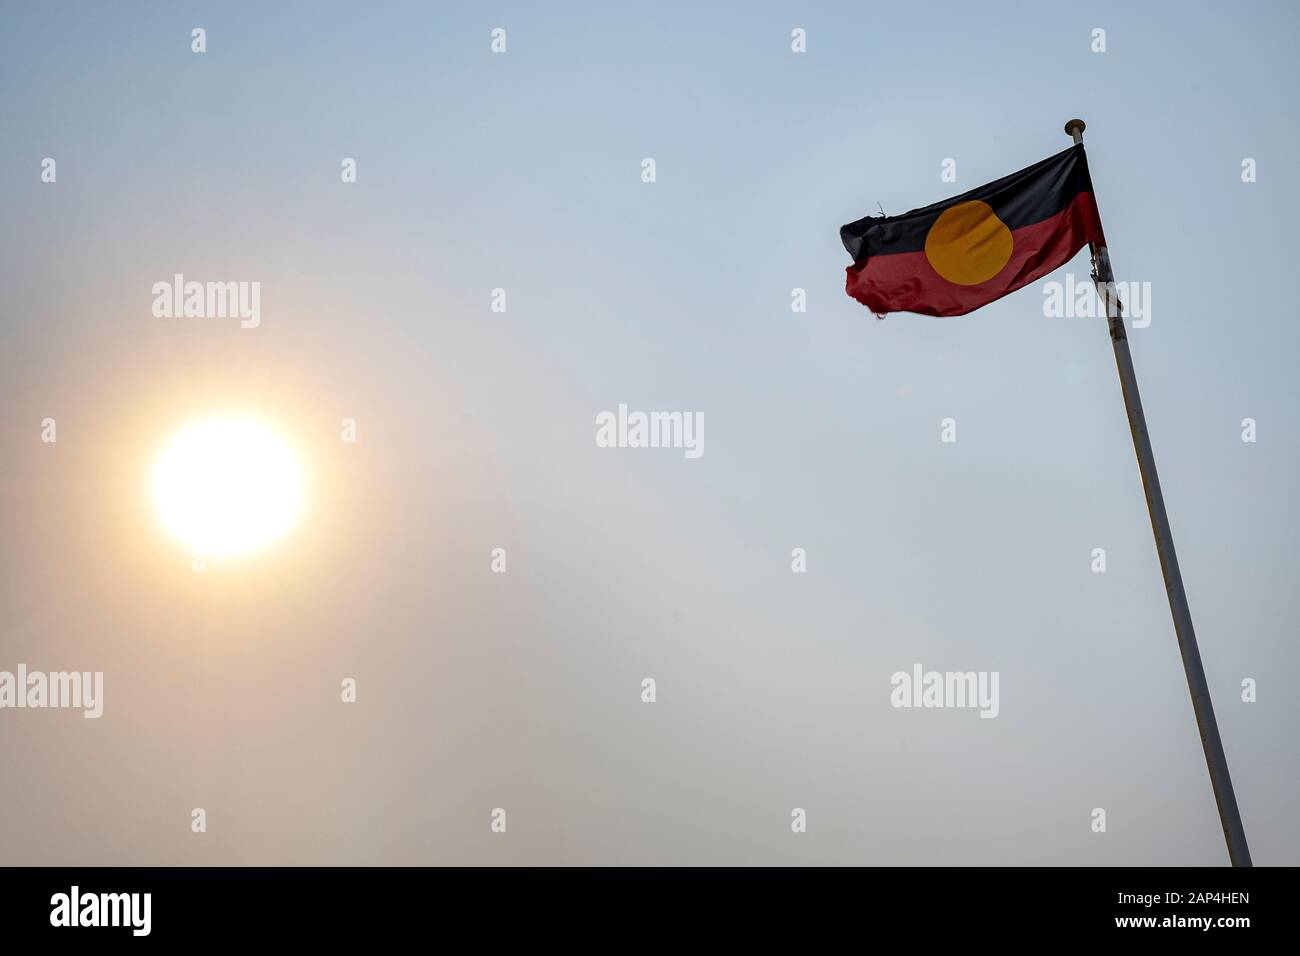 Aboriginal flag flying against sky with low sun Stock Photo